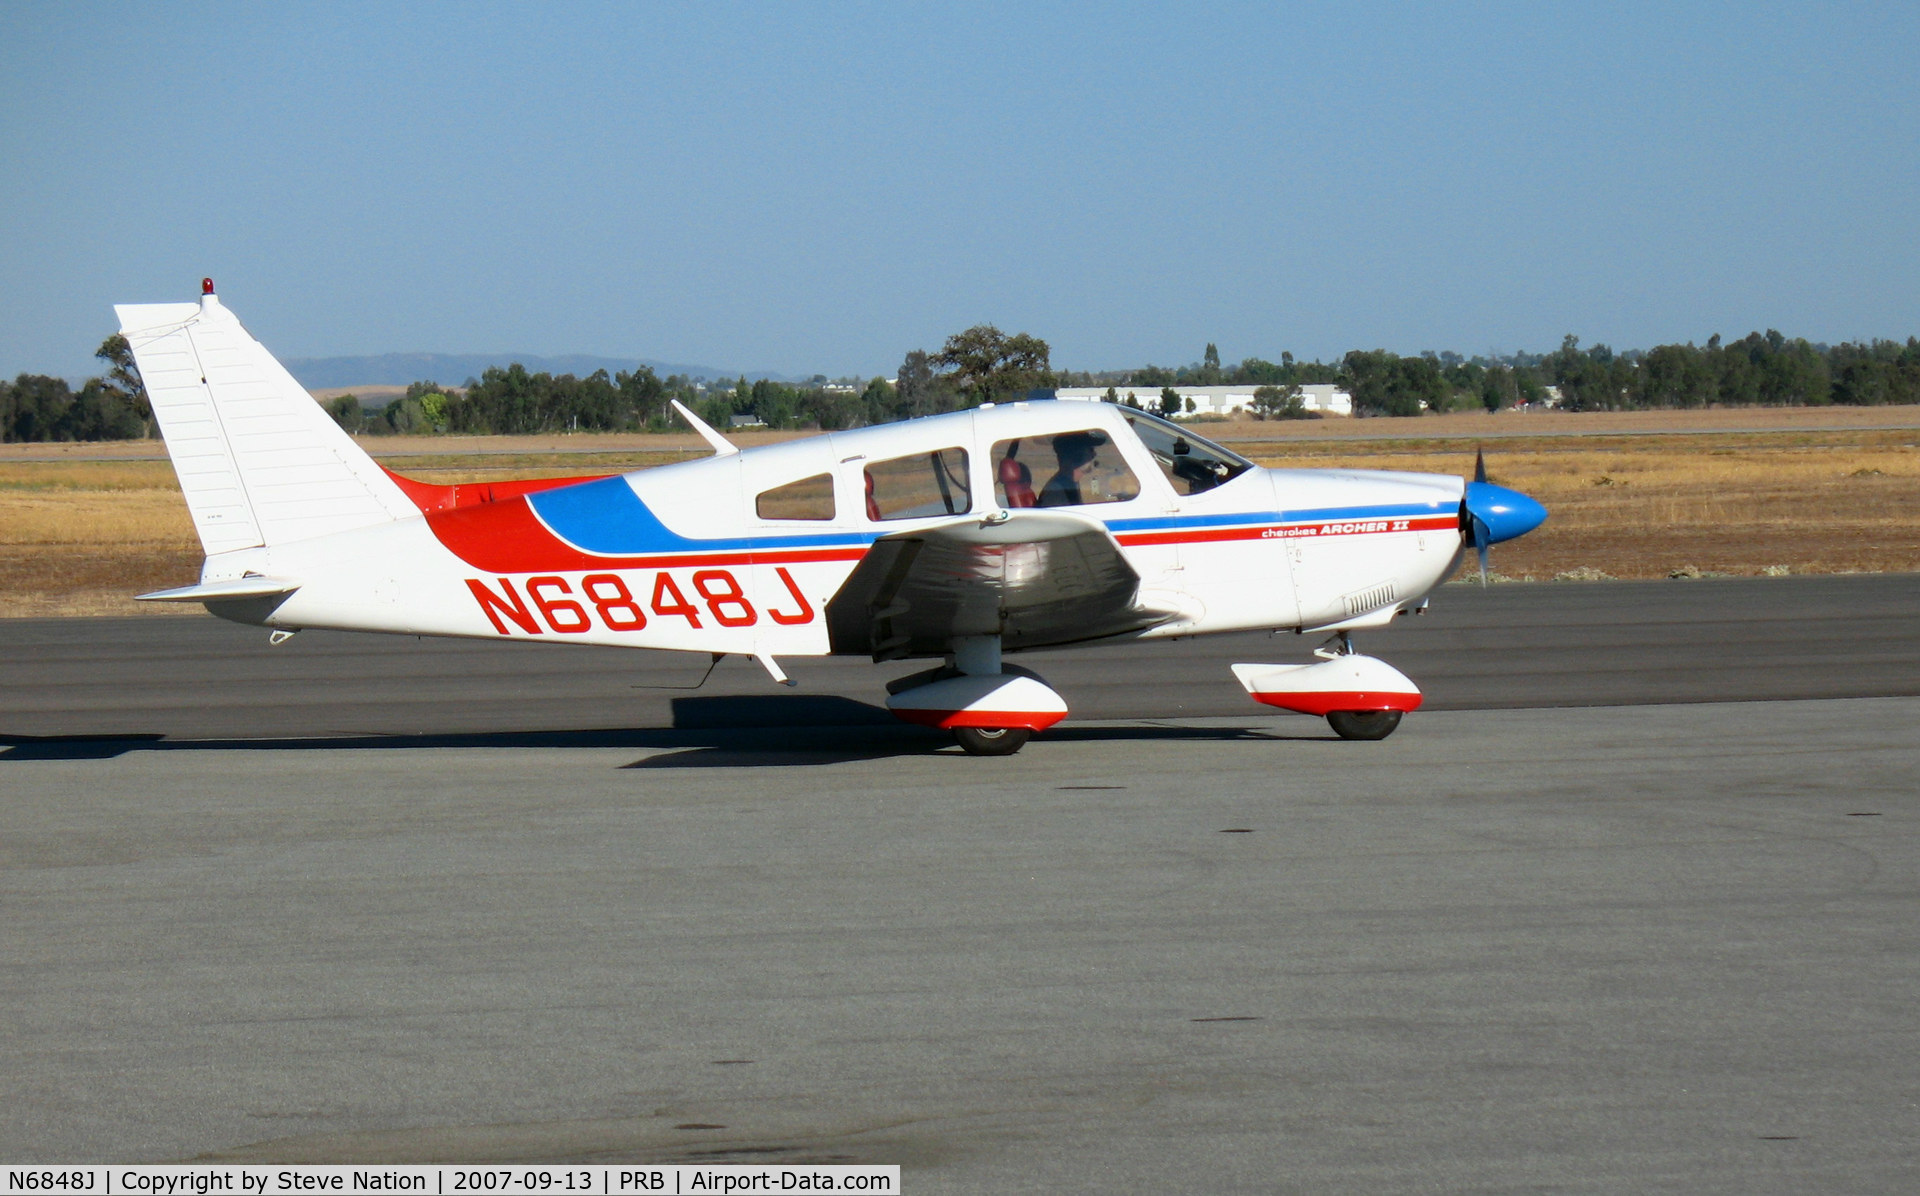 N6848J, 1976 Piper PA-28-181 Archer II C/N 28-7690409, 1976 Piper PA-28-181 taxying back for take-off @ Paso Robles Municipal Airport, CA